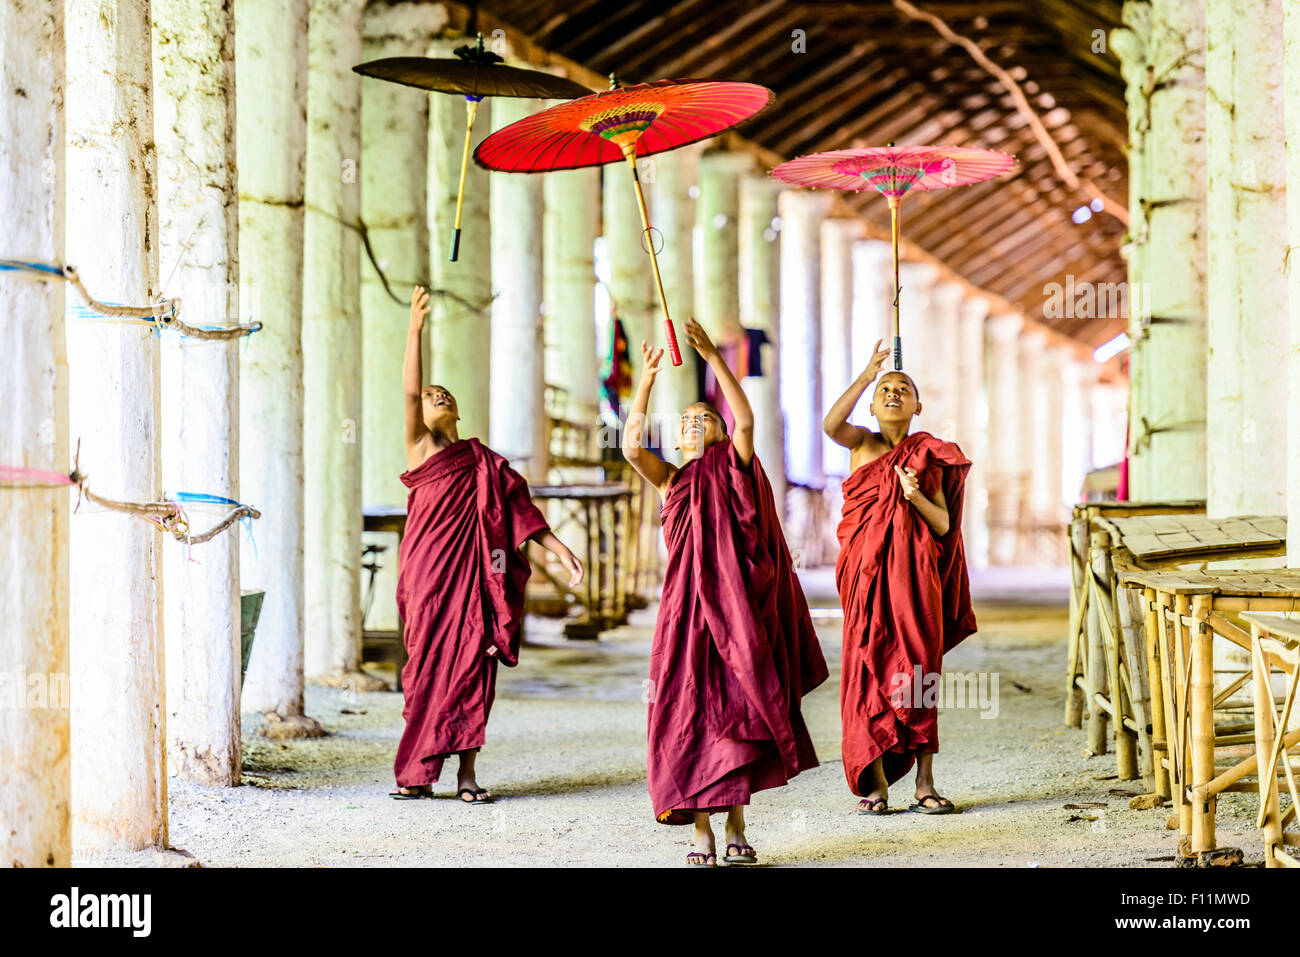 Asian monks-in-training playing with parasols in hallway Stock Photo